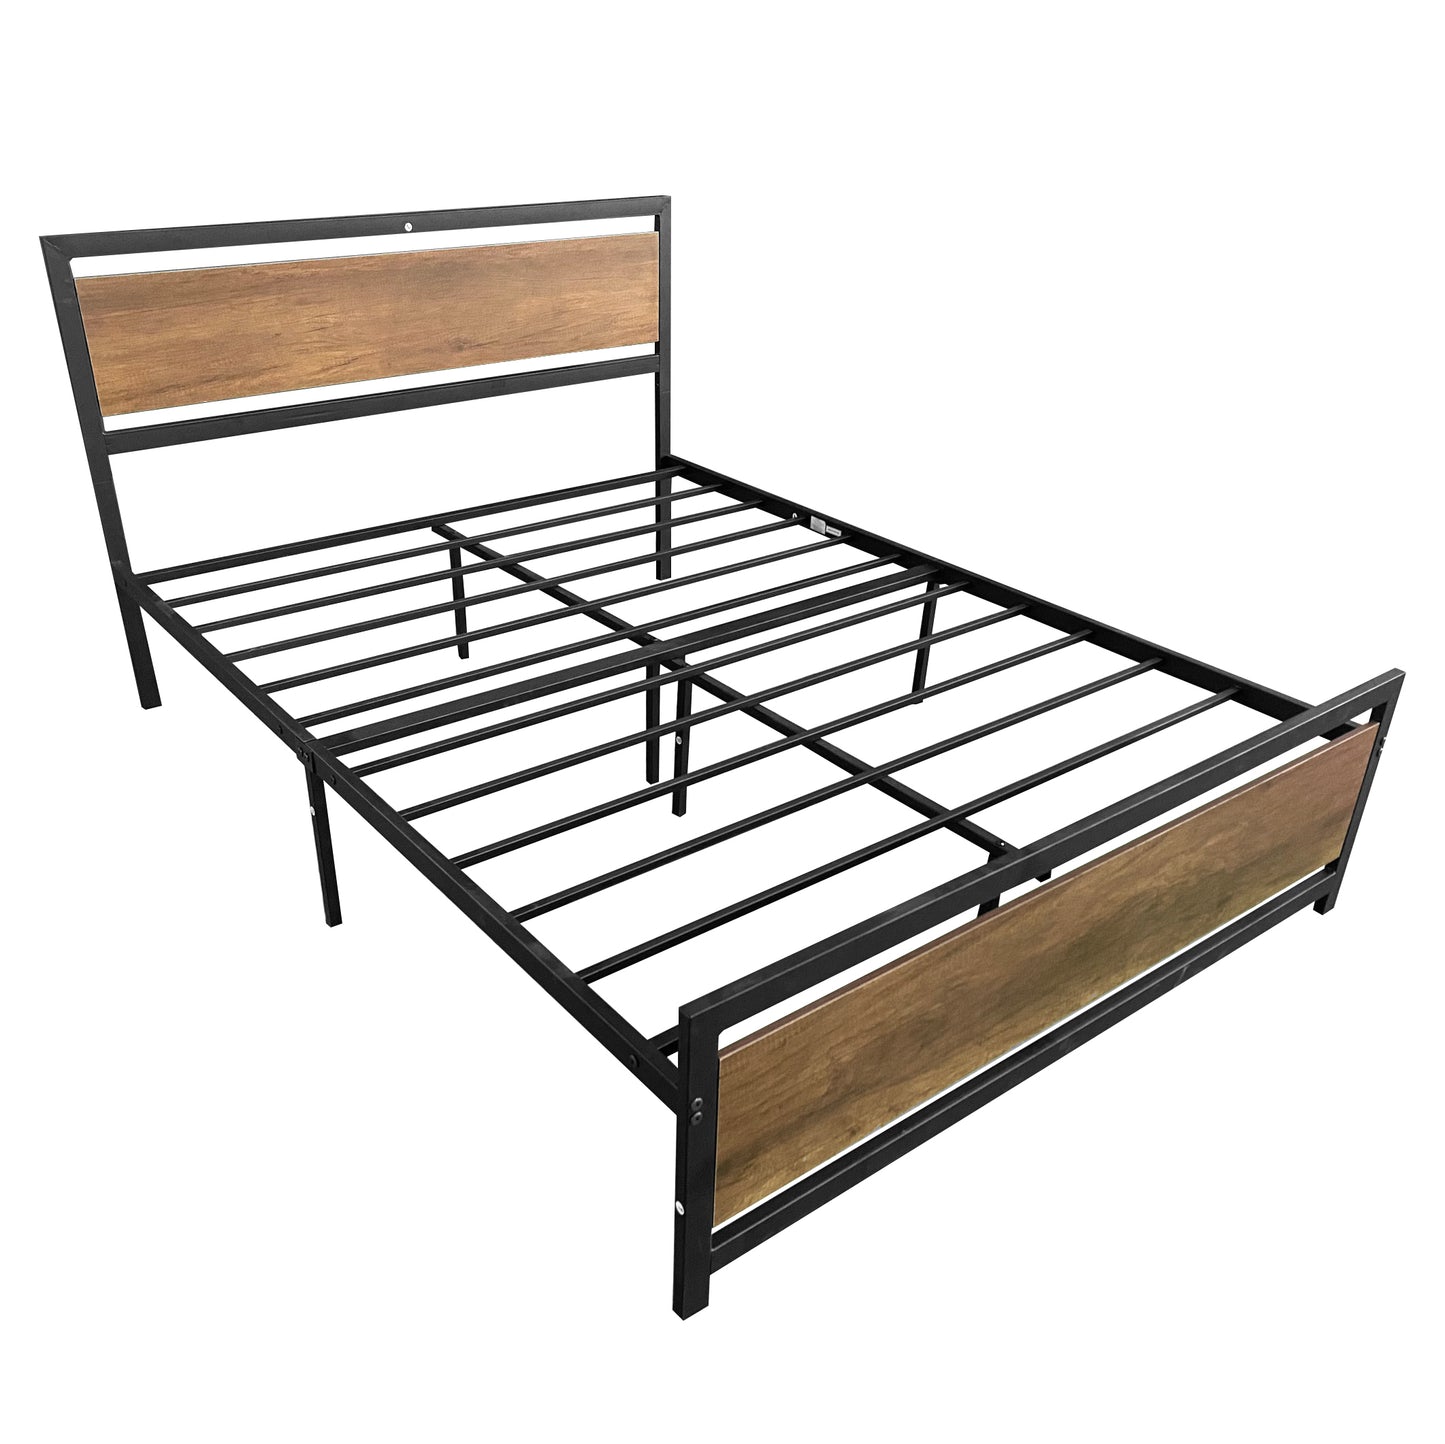 Full Bed Frame with Headboard, Metal Platform Bed Frame Full Size with Strong Steel Slat Supported for Kids Teens Adults, Black, LJ920